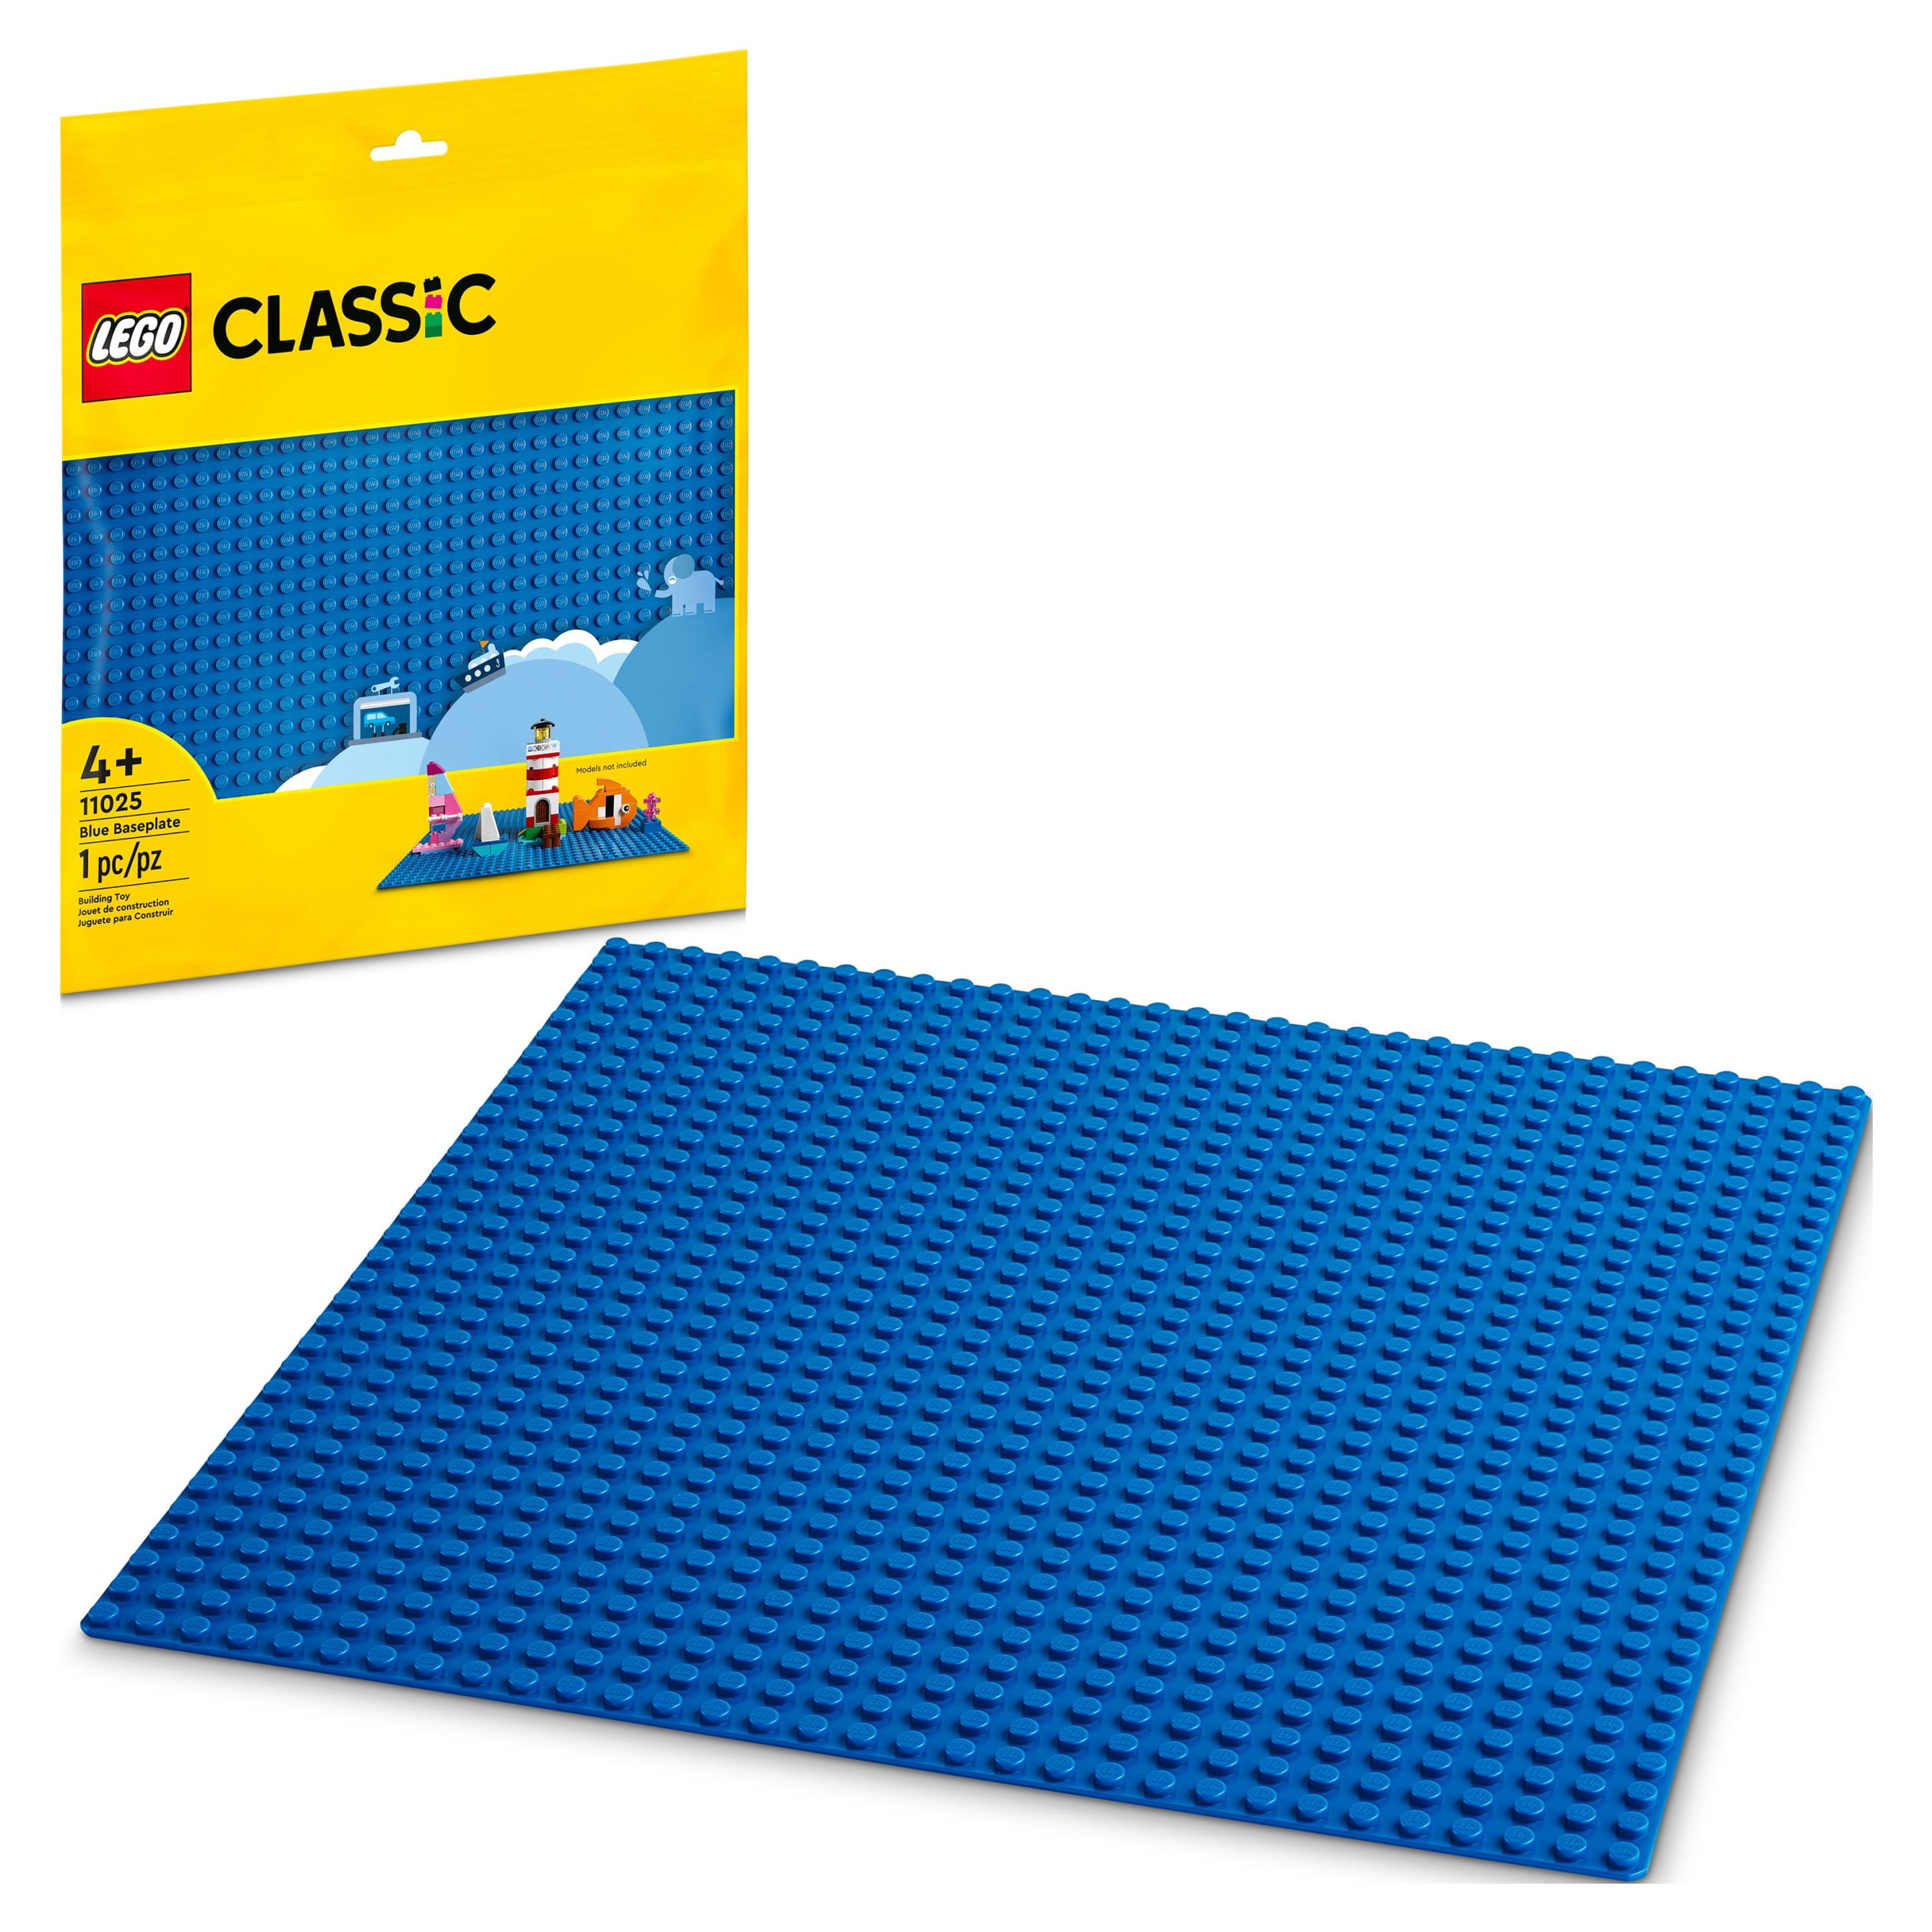 LEGO Classic Gray Baseplate 11024 Building Kit; Square 48x48 Landscape for  Open-Ended Imaginative Building Play; Can Be Given as a Birthday, Holiday  or Any-Day Gift for Kids Aged 4 and up (1